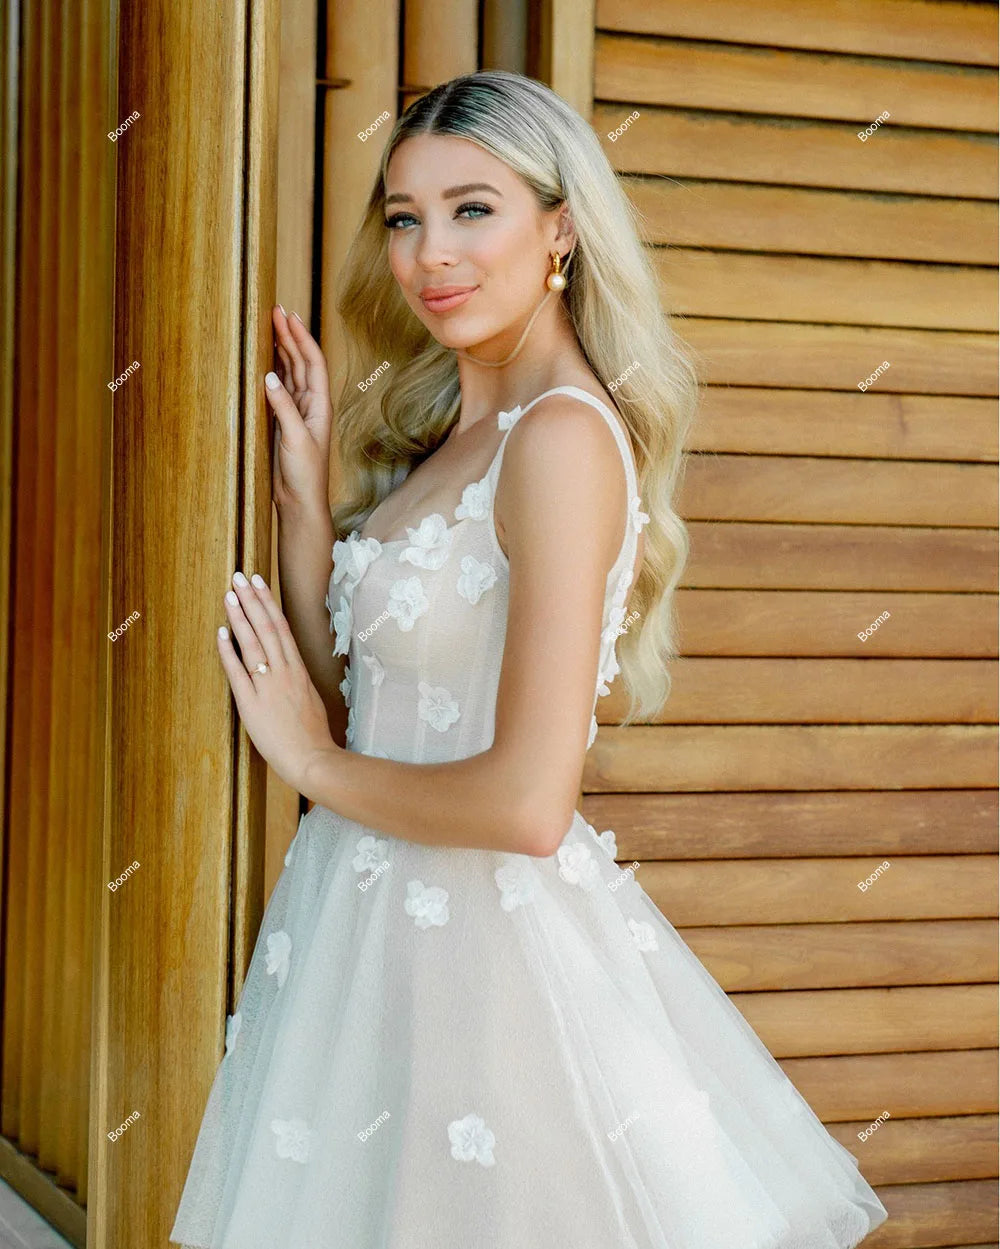 A-Line Short Wedding Dresses 3D Flowers Sleeveless Tulle Brides Party Gowns for Women Cocktail Gowns vestidos novias boda